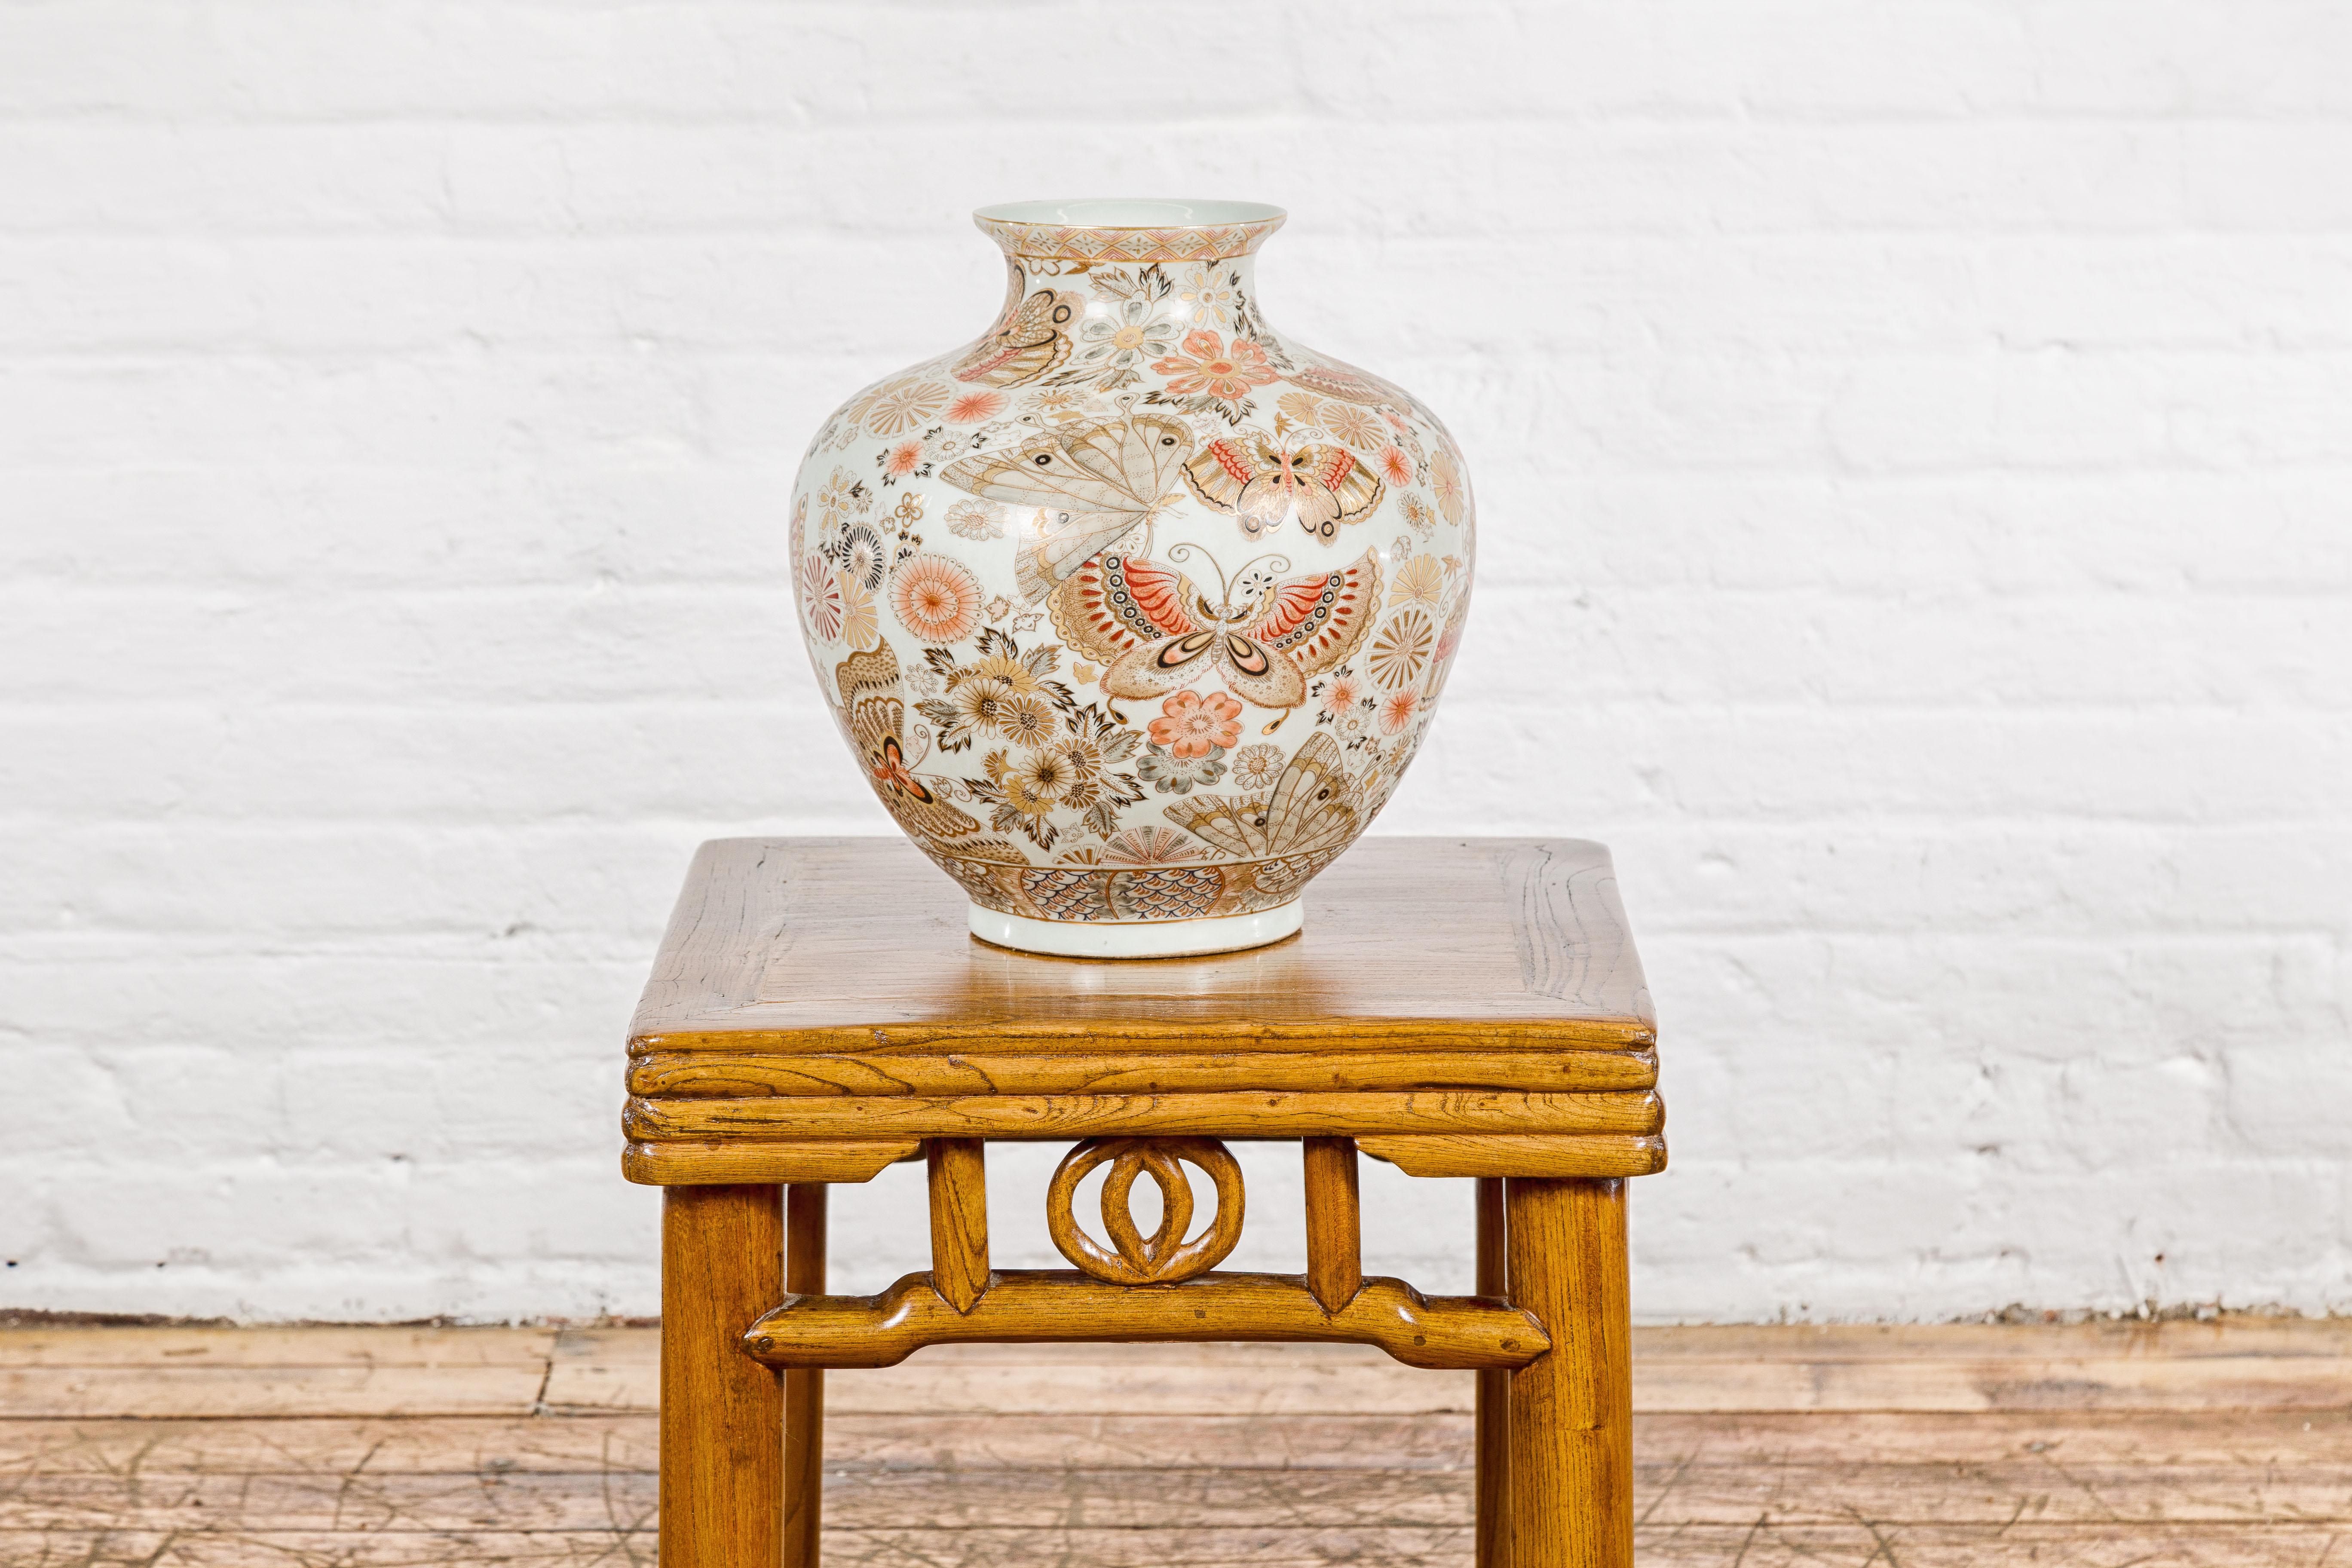 A Chinese vintage Japanese Kutani style vase from the mid-20th century, with floral and butterfly decor. This Kutani-style vase, originating from mid-20th century China and inspired by Japanese artistry, is a celebration of beauty and intricacy.